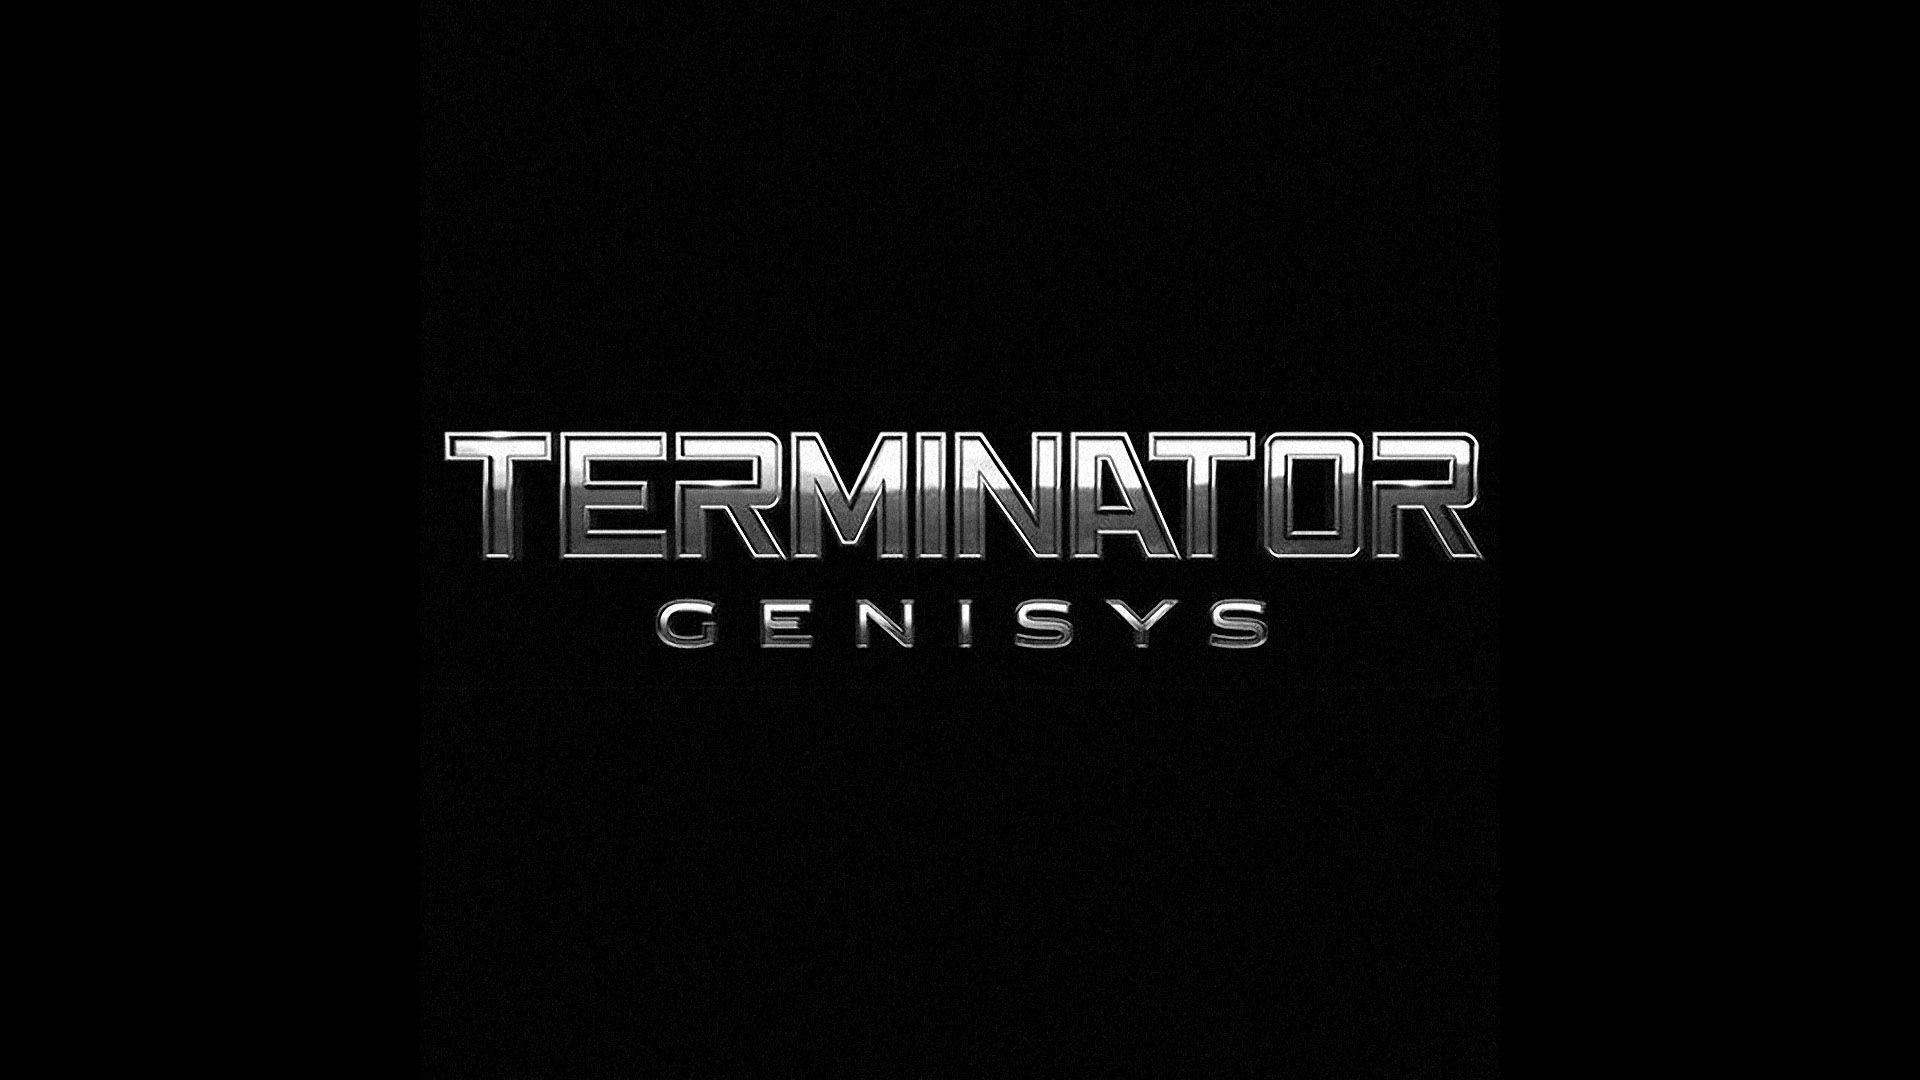 Terminator: Genisys 2015 Movie Logo Wallpapers Wide or HD